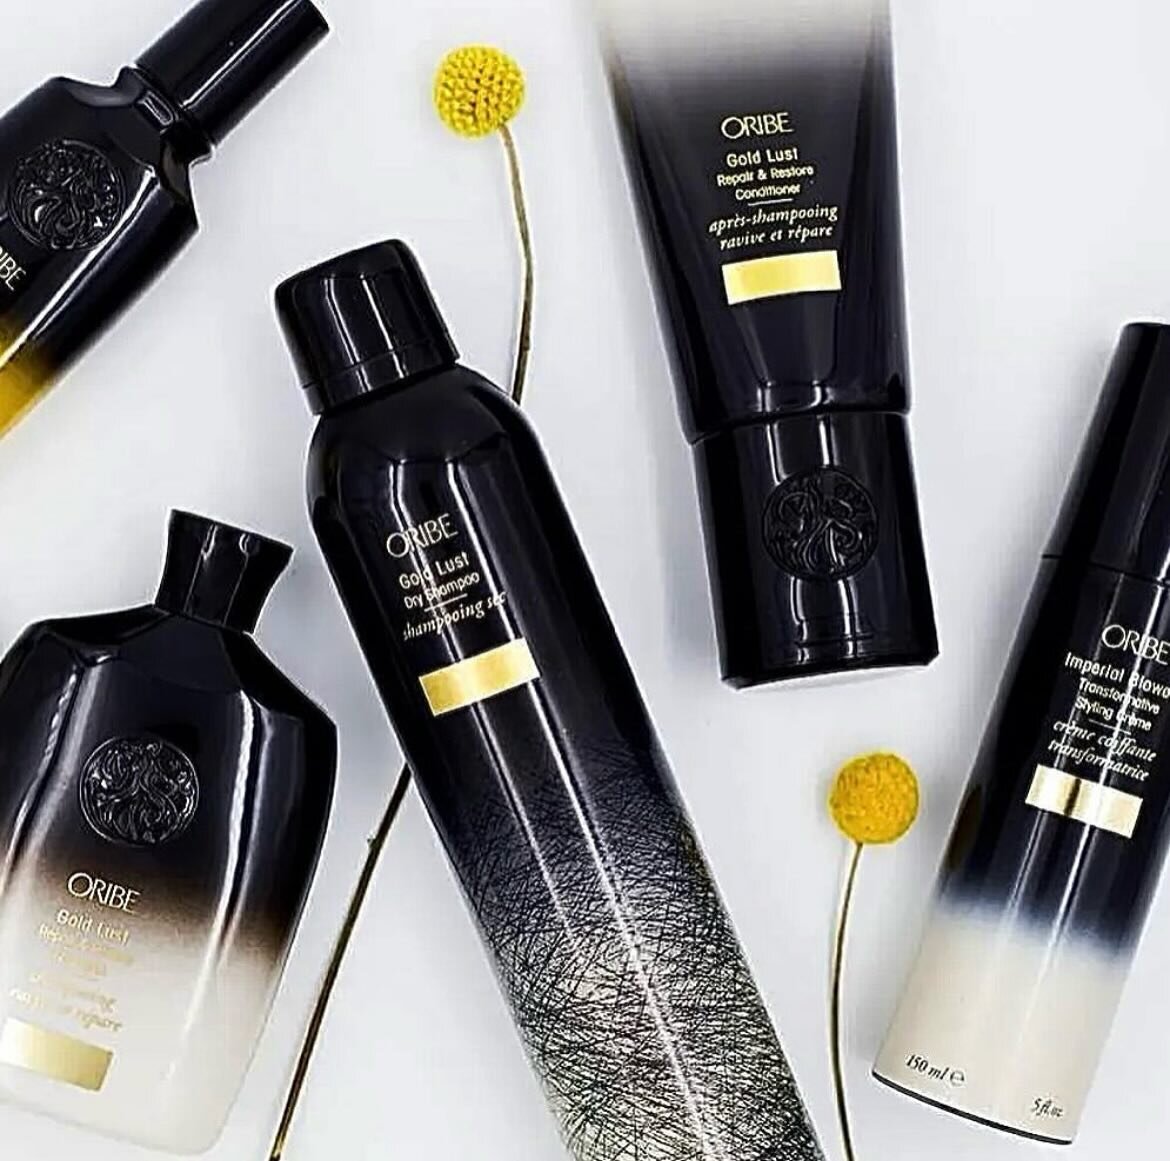 🌟Stock up with some of our @oribe favorites! The Gold Lust products are Oribes richest line. Rejuvenate your scalp with their shampoo &amp; conditioner, keeping your hair healthy and nourished with their styling products! 🌟